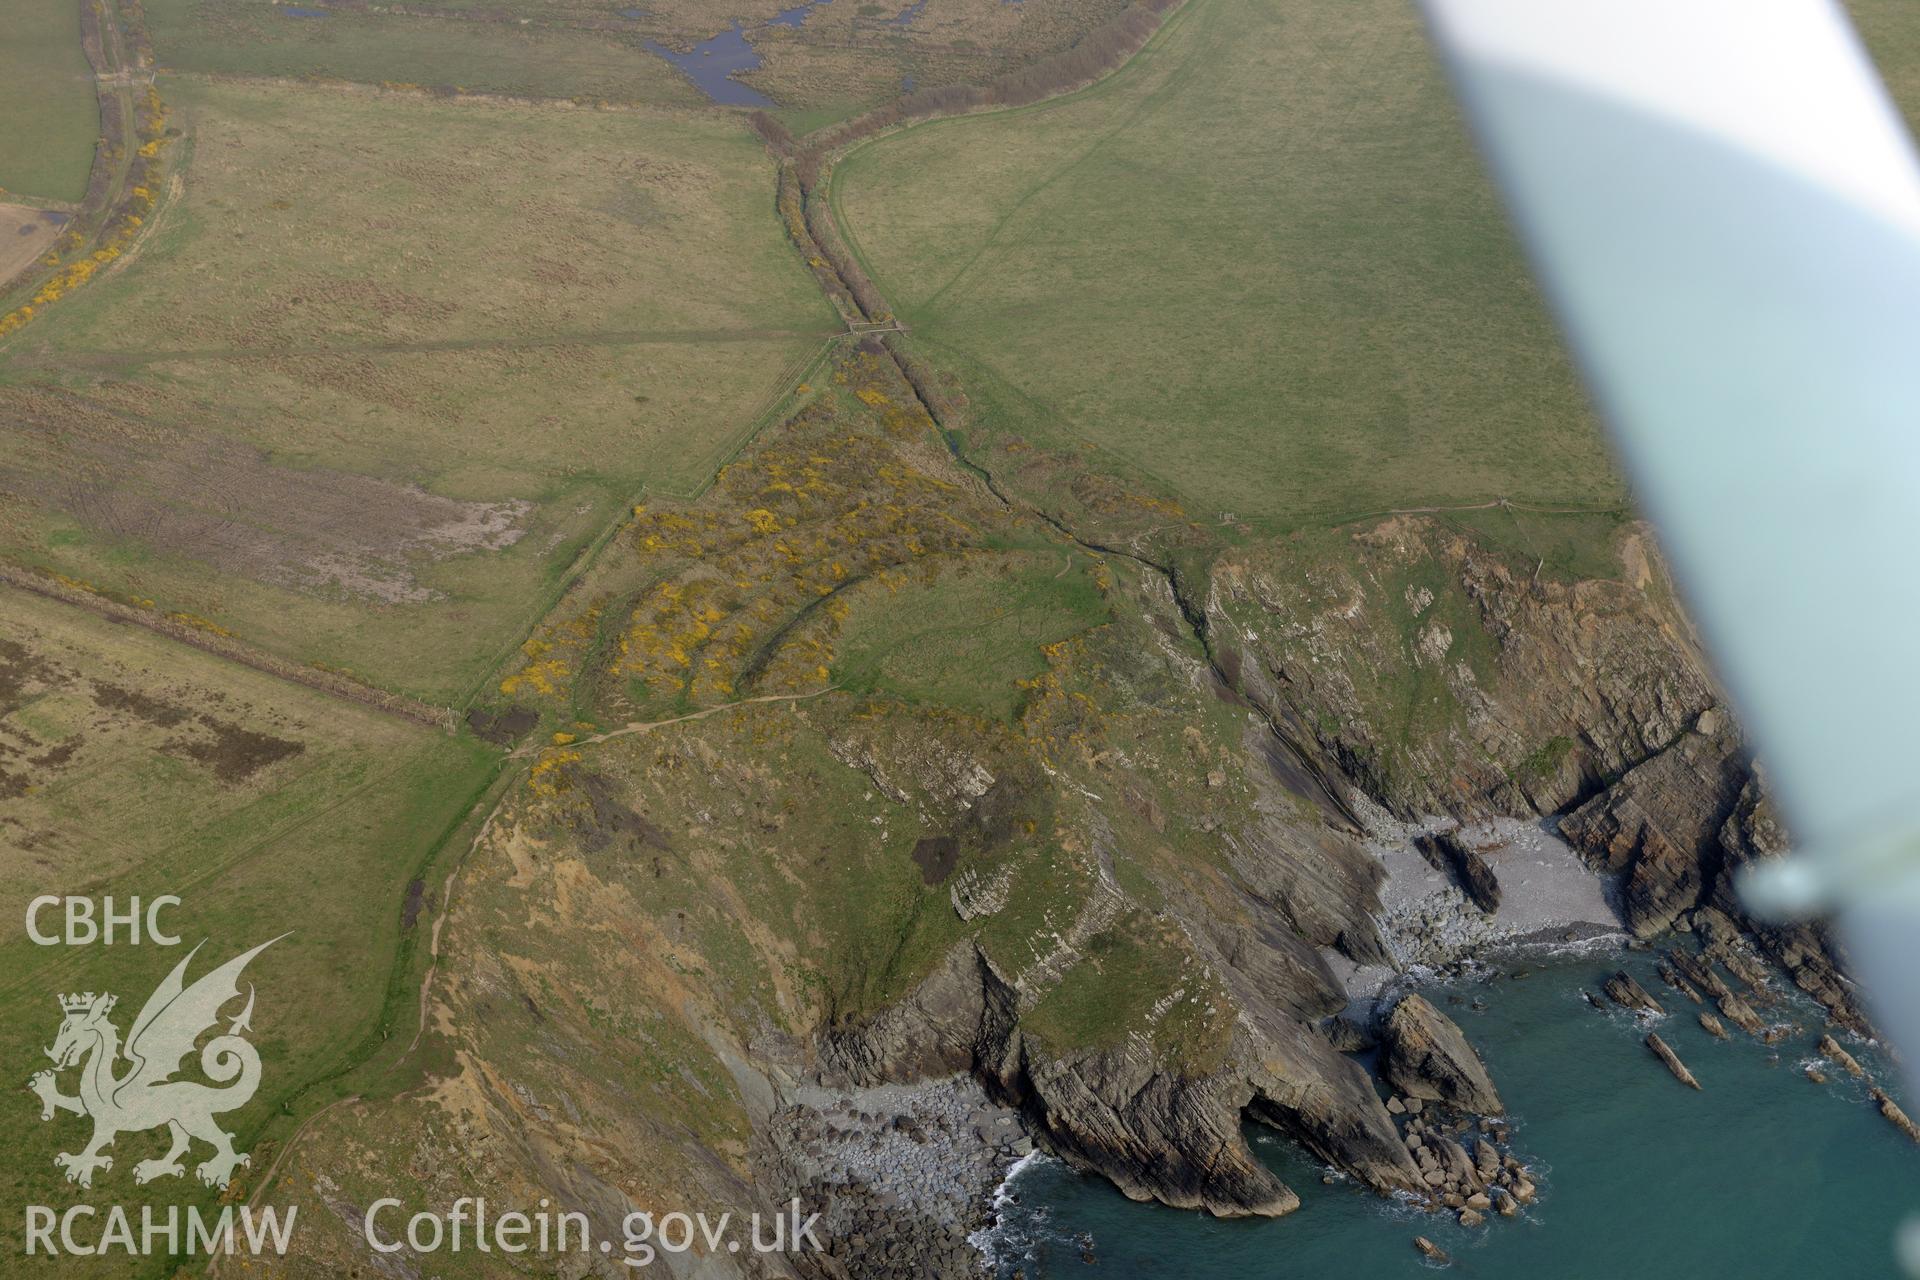 Aerial photography of Watery Bay Rath taken on 27th March 2017. Baseline aerial reconnaissance survey for the CHERISH Project. ? Crown: CHERISH PROJECT 2017. Produced with EU funds through the Ireland Wales Co-operation Programme 2014-2020. All material made freely available through the Open Government Licence.